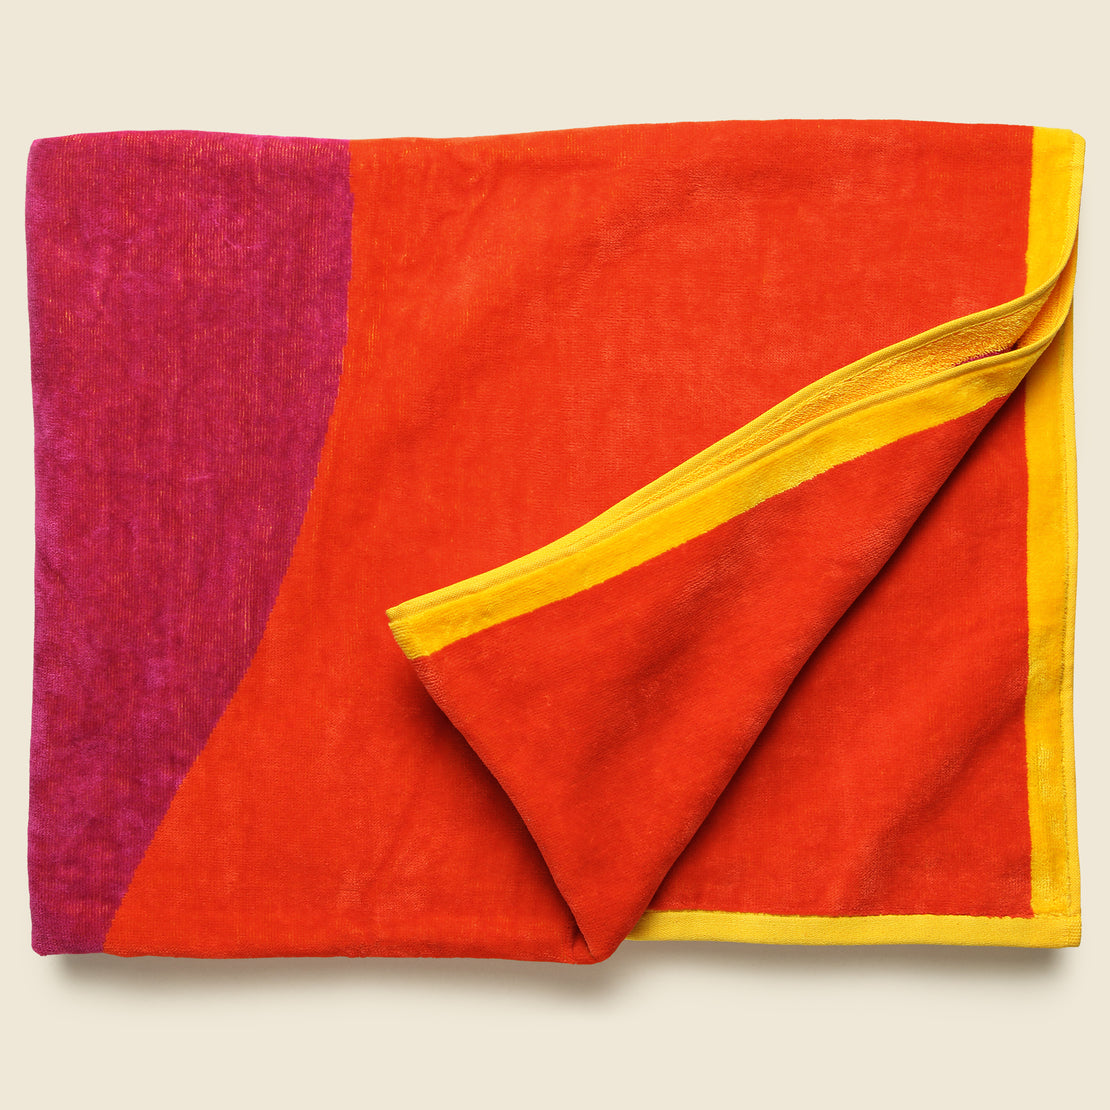 Exclamation Towel - Red/Orange